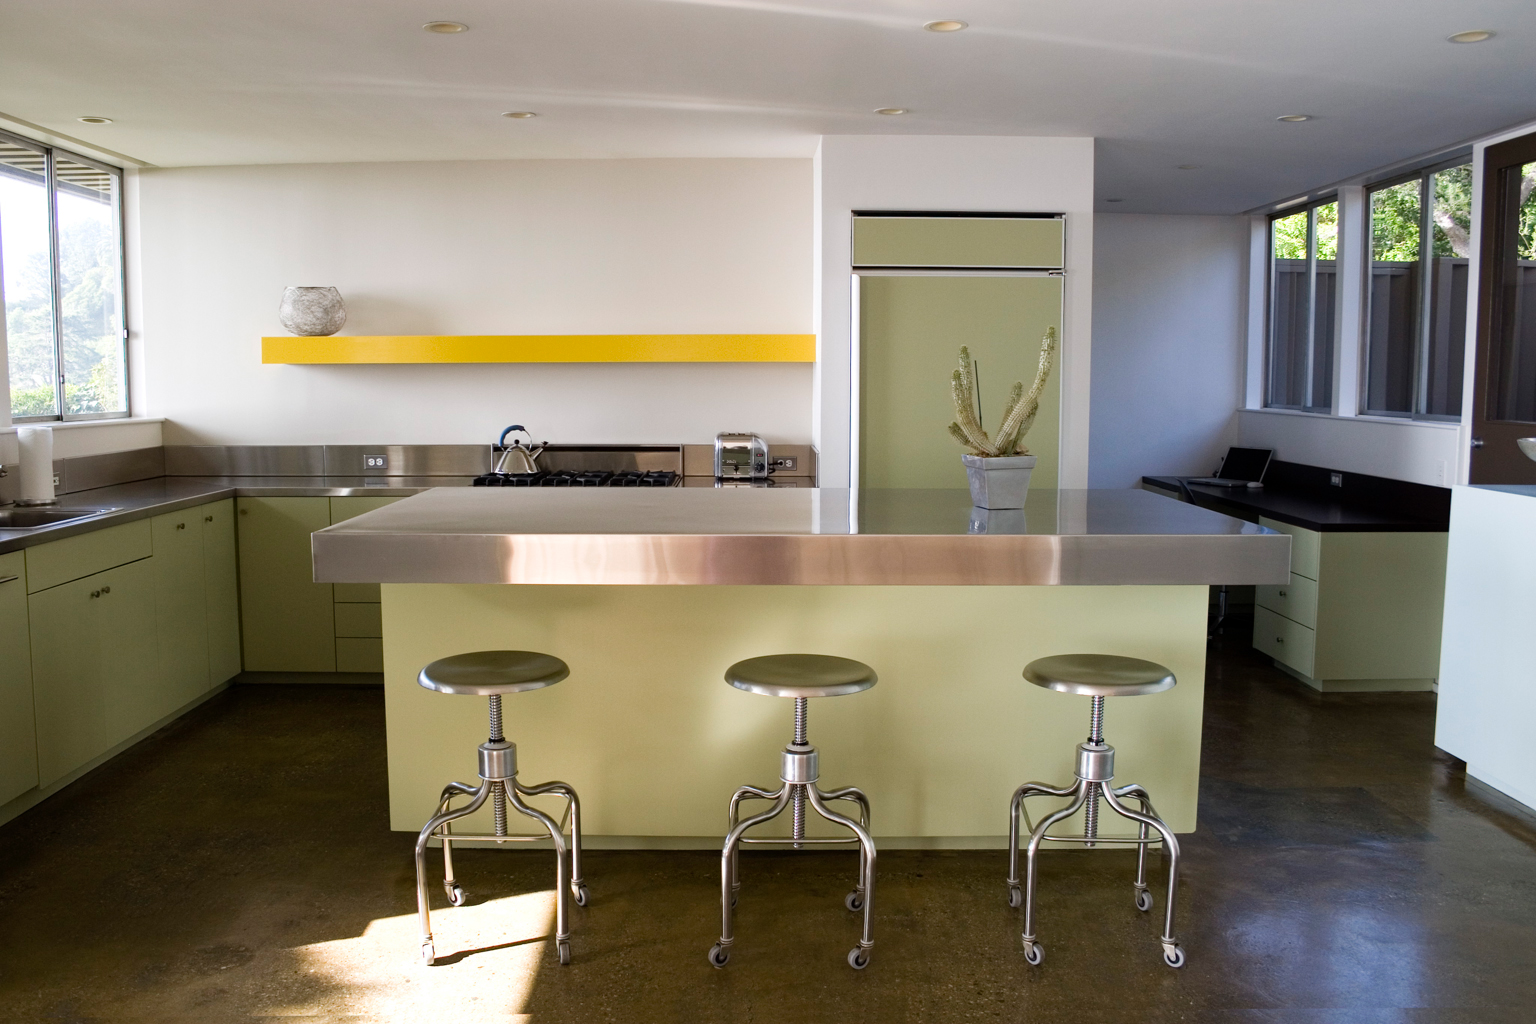 Chrome Kitchen with 3 Stools